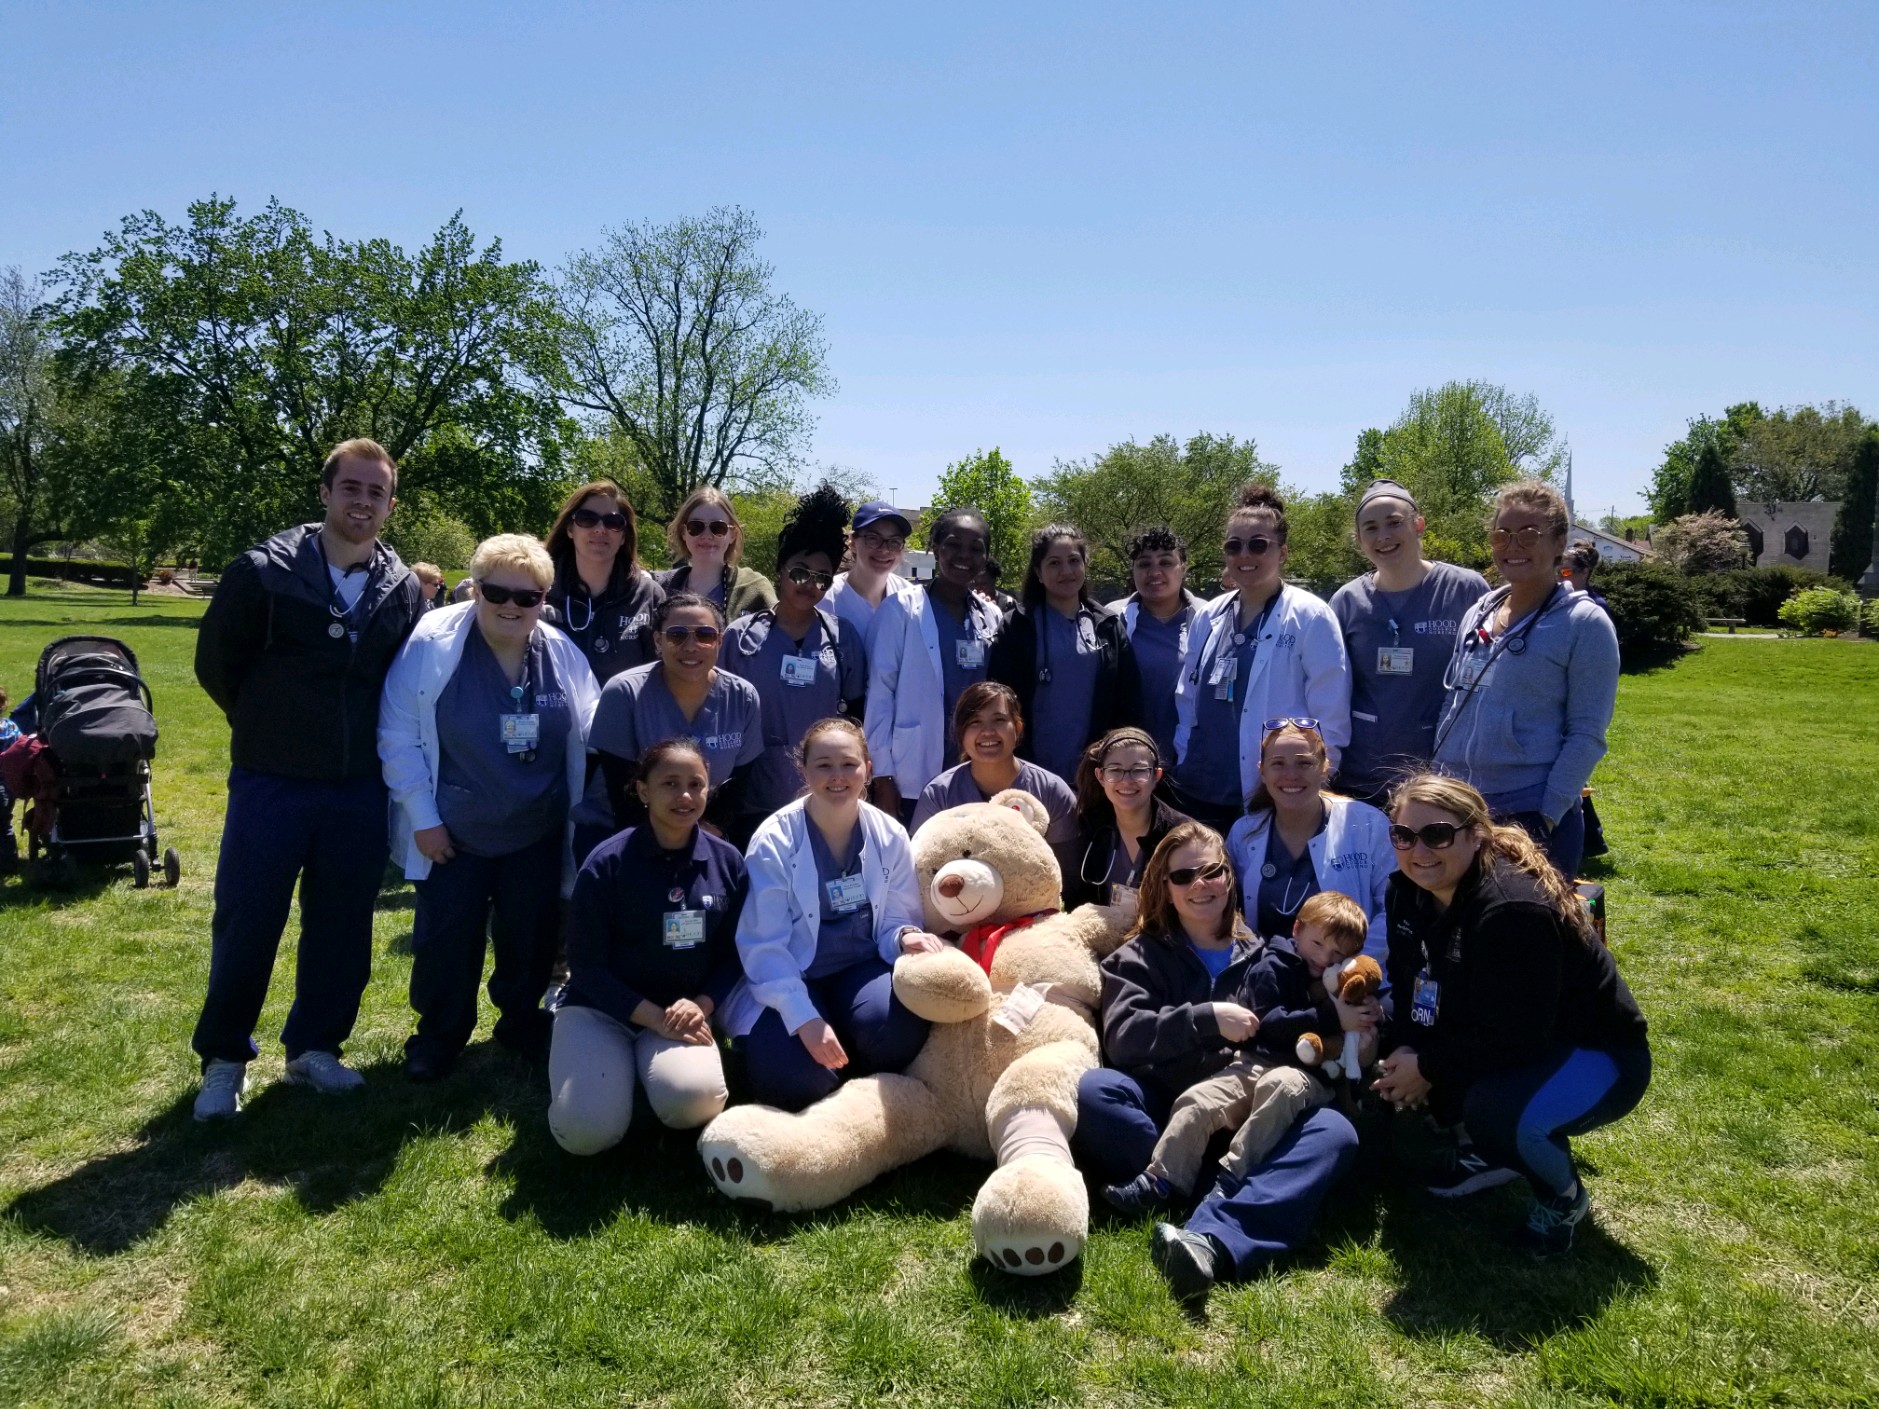 Students provide checkups for Teddy Bears